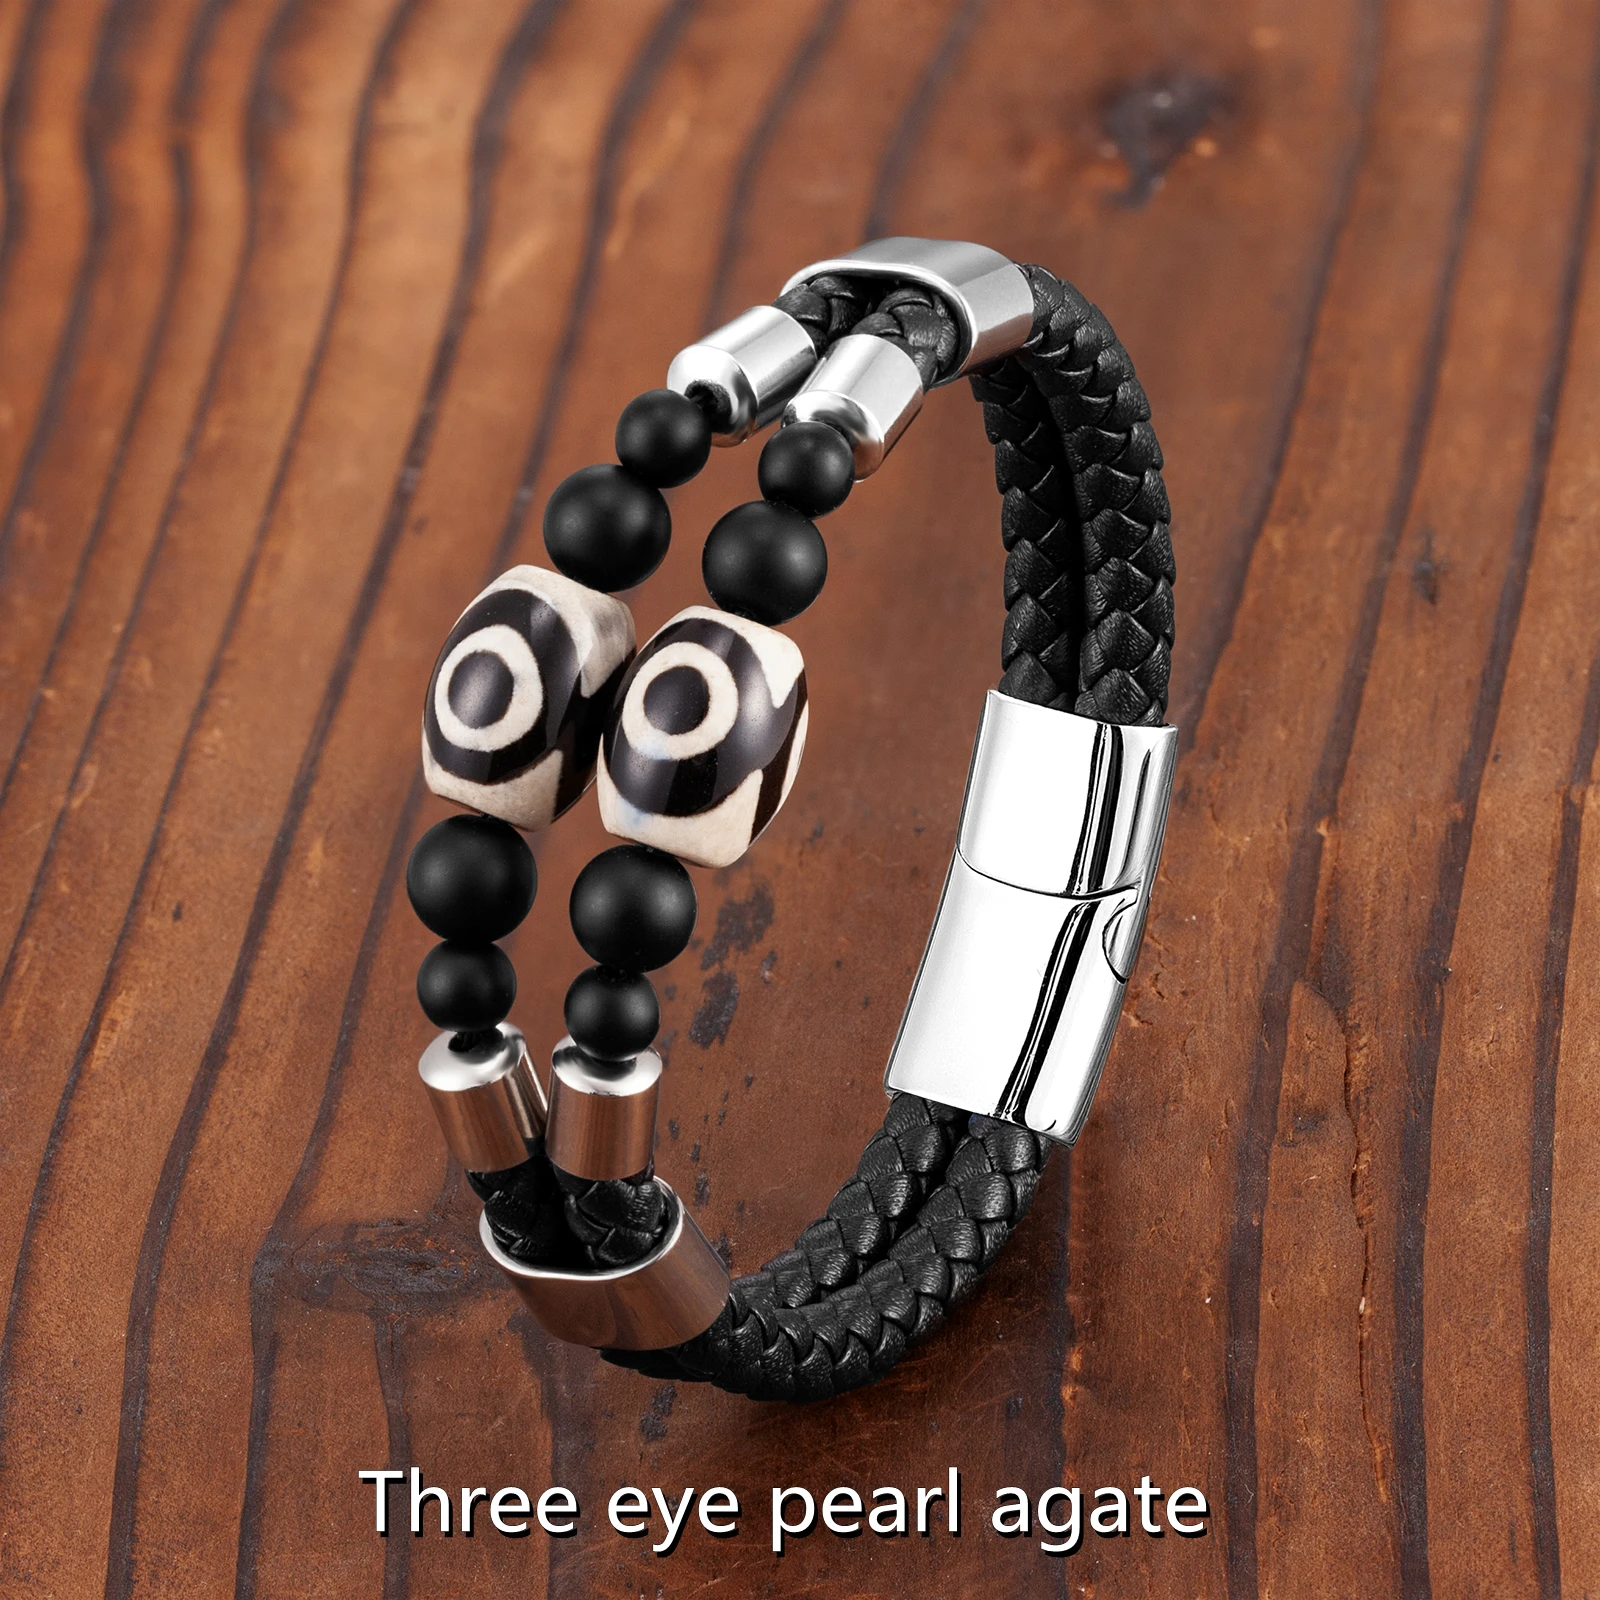 

2021 New Natural Agate 3 Eyes Dzi Double Row Vintage Jewelry Men's Bracelet 316L Stainless Steel Leather Rope Charm Bracelet